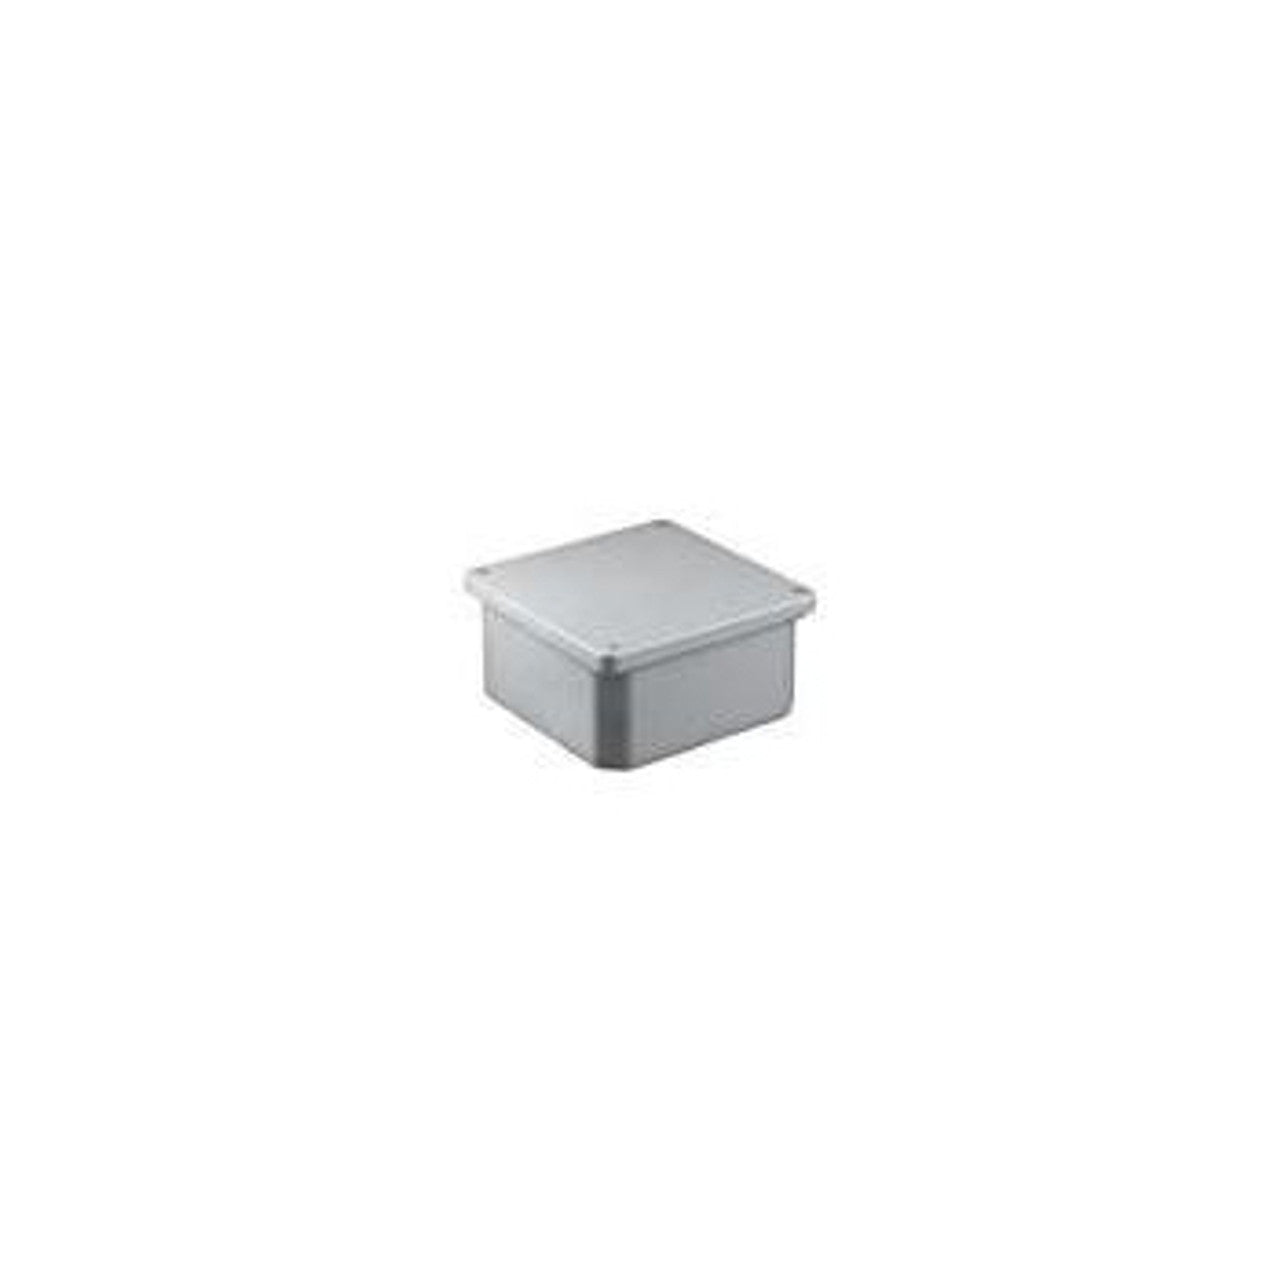 ROYAL RJB444 Conduit Junction Box With Gasket, 4 x 4 x 4 in